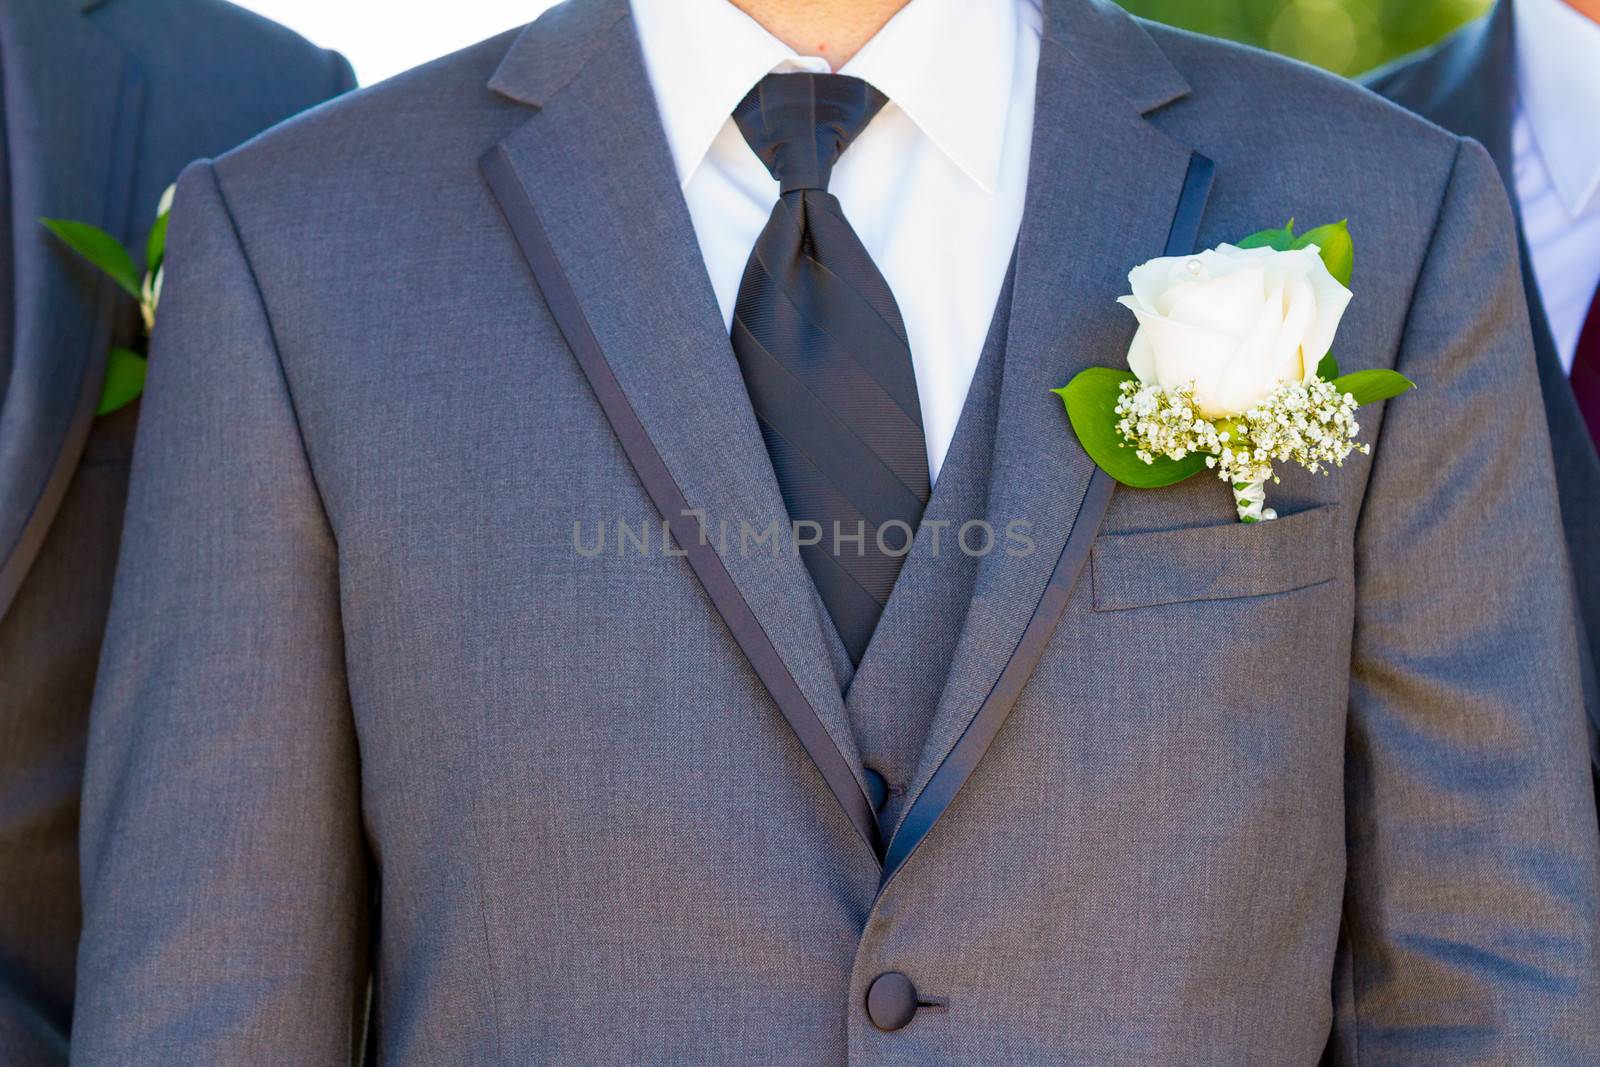 An attractive groom poses for a portrait on his happy wedding day outside at a winery vineyard in Oregon during the summer.